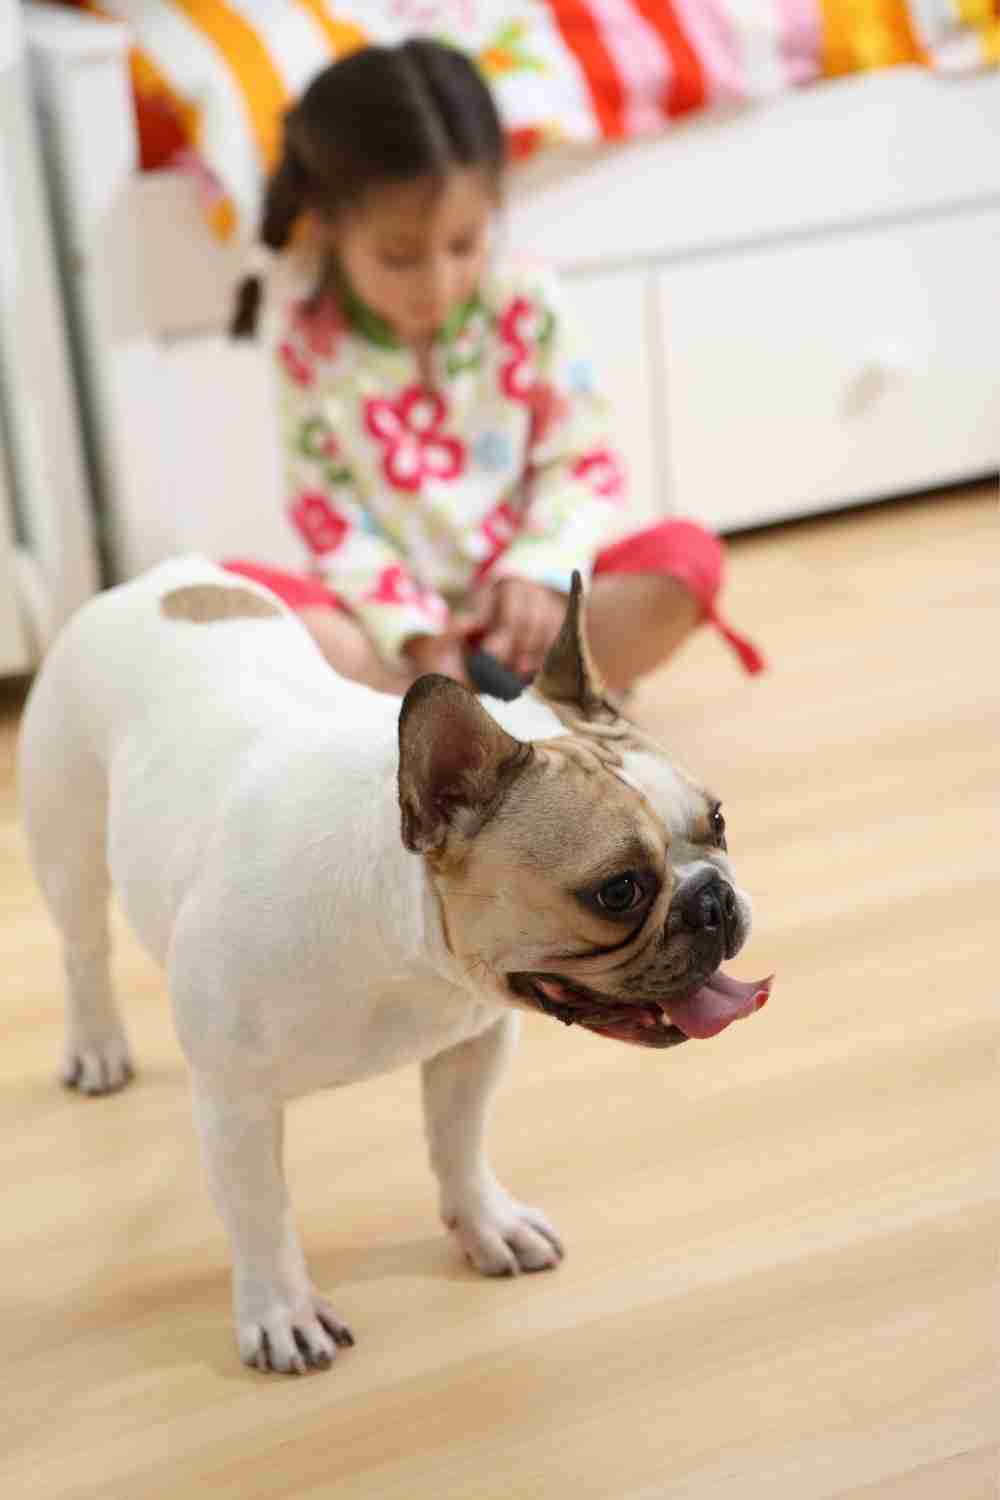 Measures to take around the house to ensure safety for pets